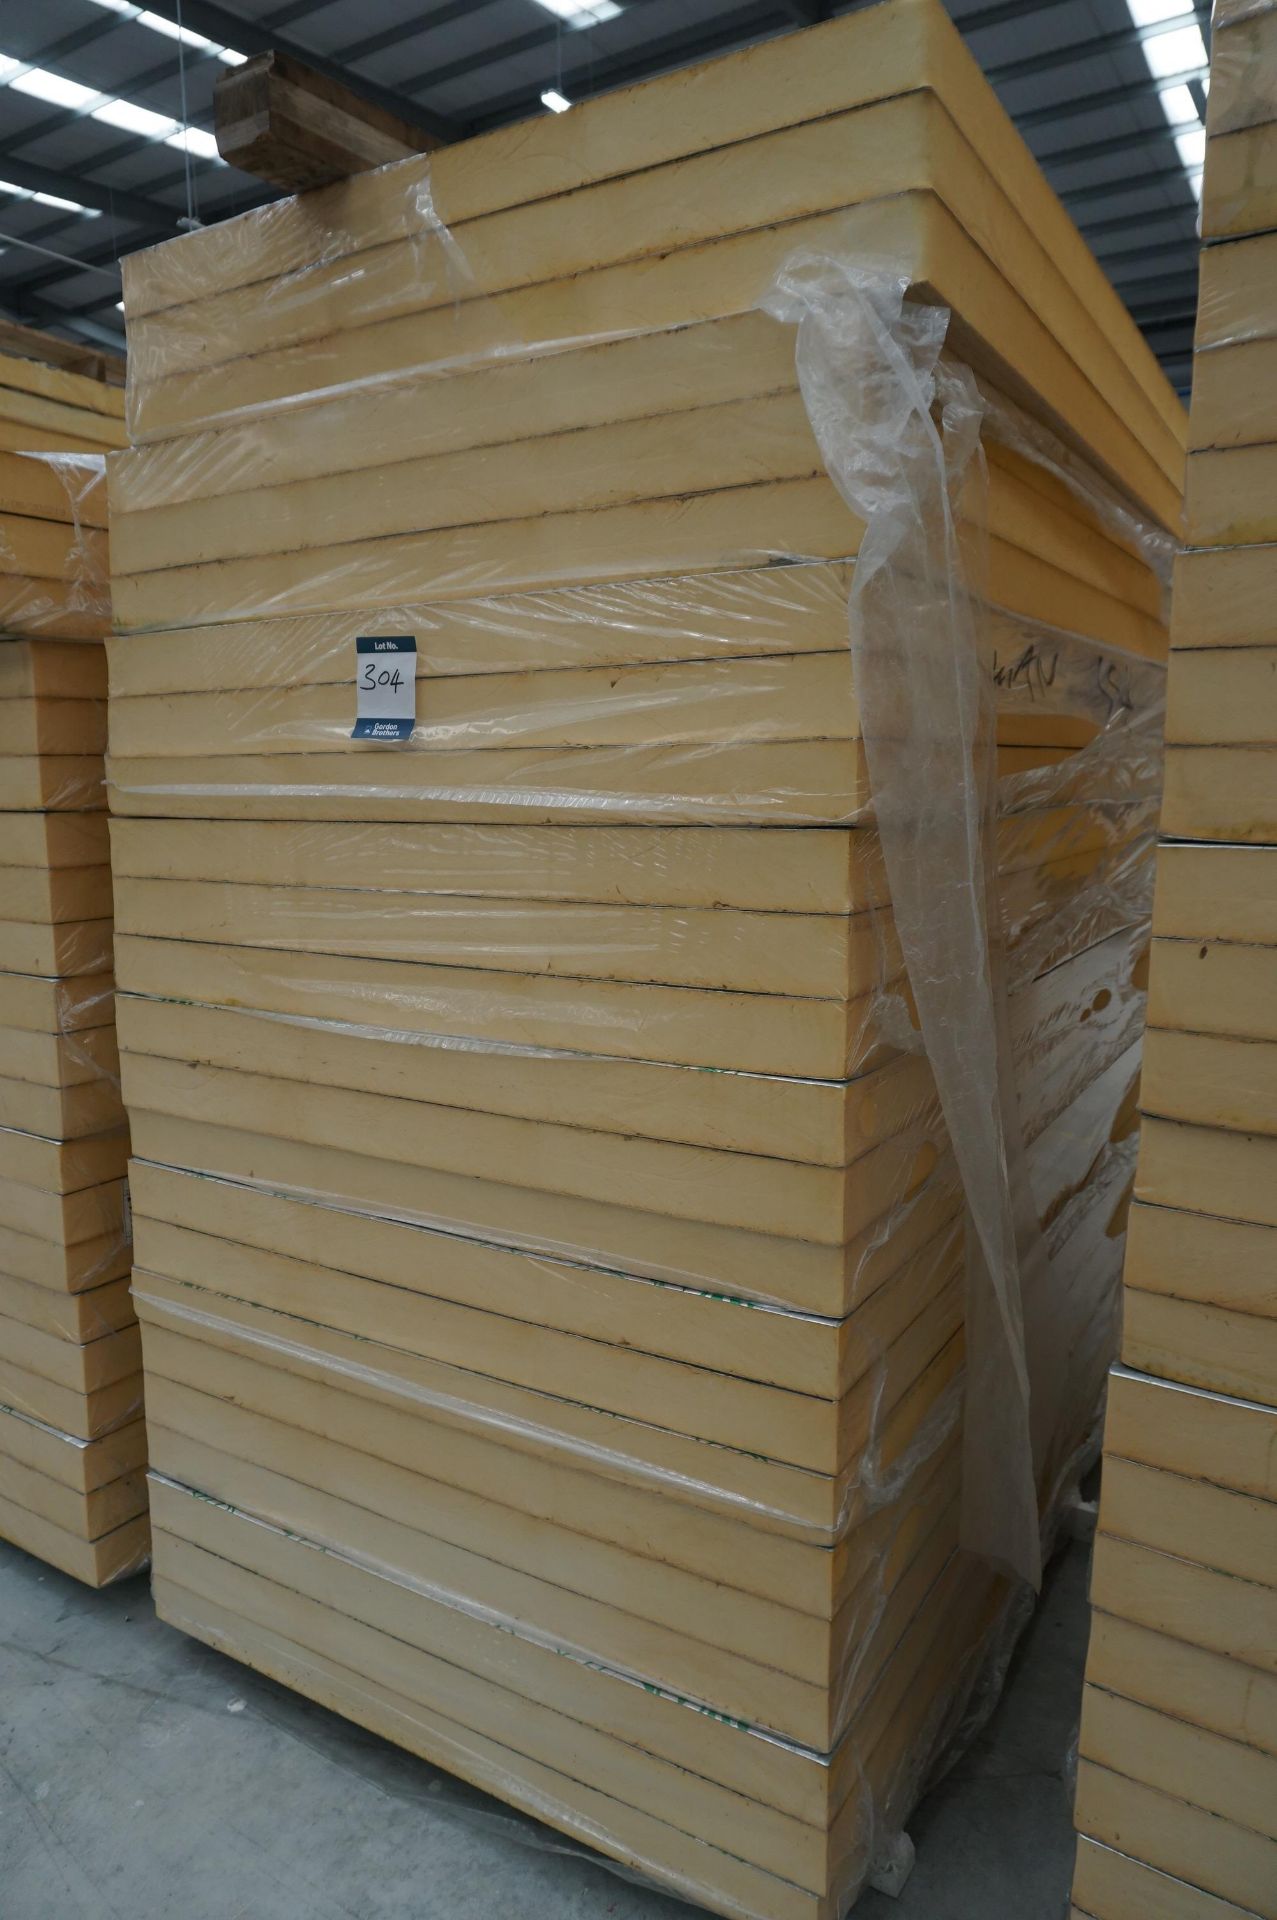 24x (no.) Kingspan, Therma TP10 insulation boards, 1200 x 2400 x 90mm - Image 2 of 4